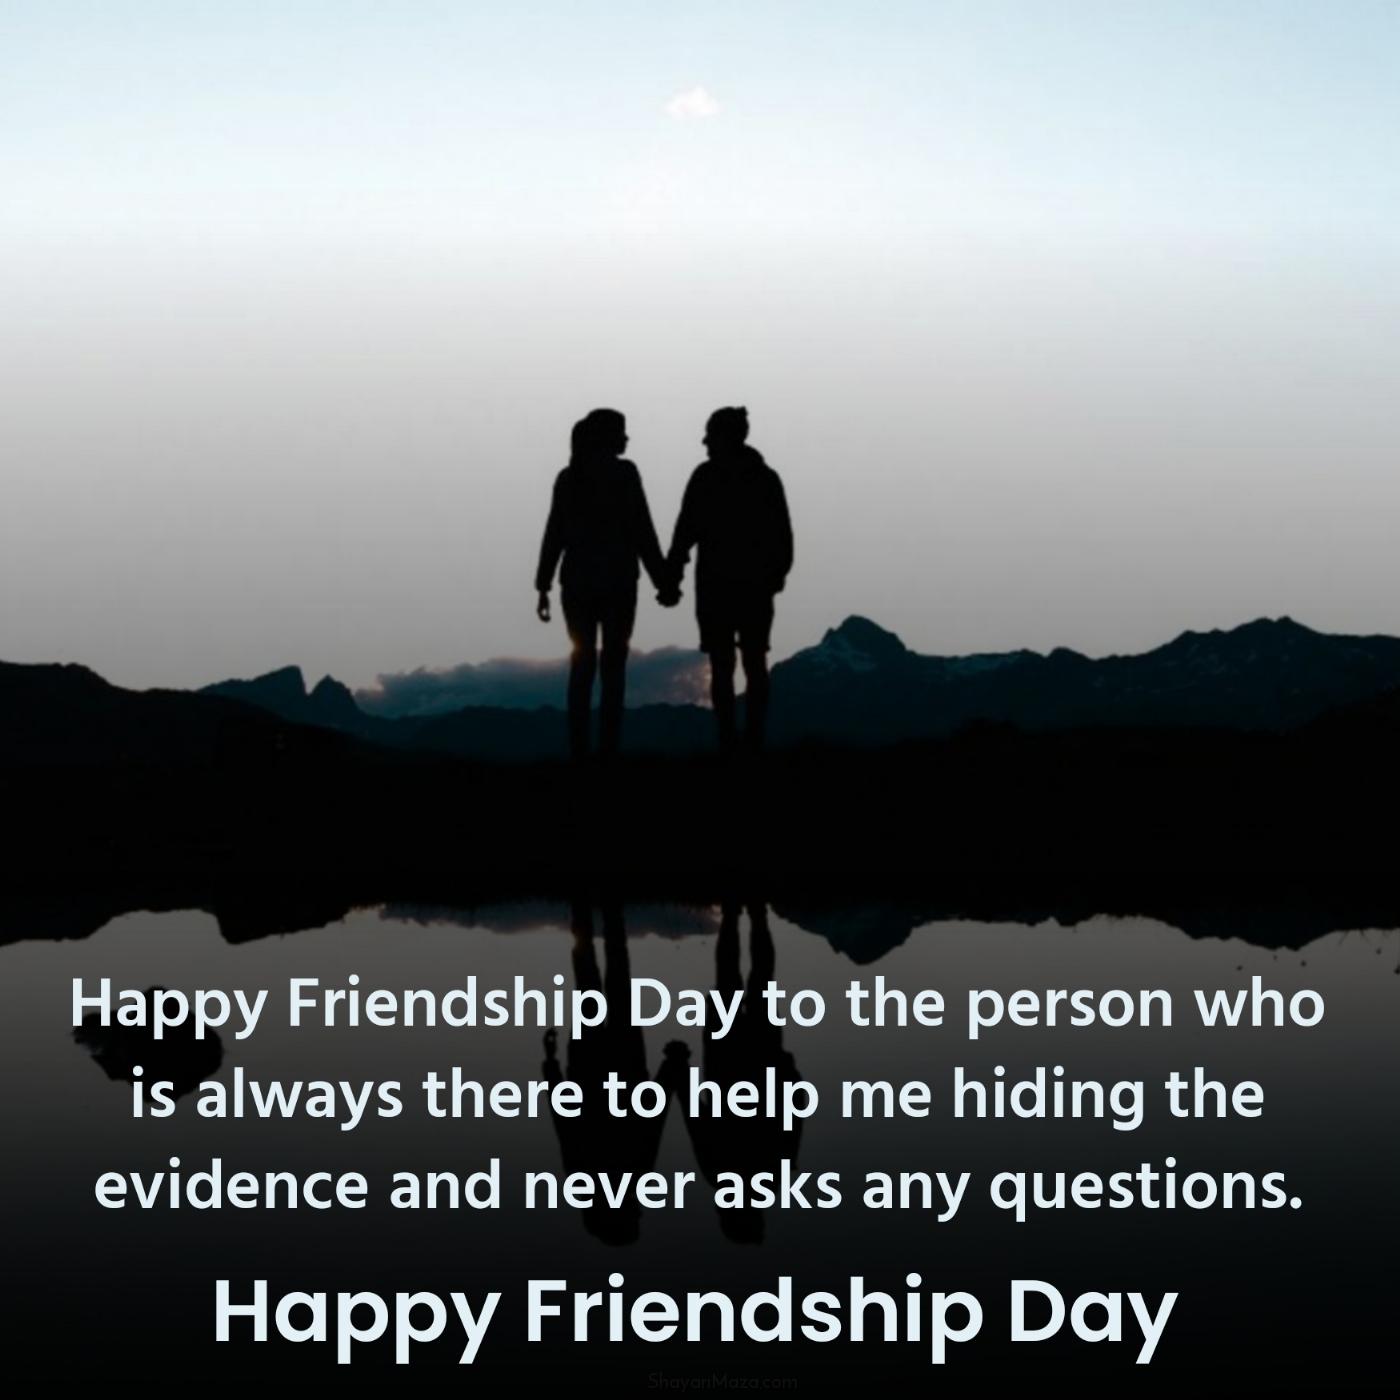 Happy Friendship Day to the person who is always there to help me